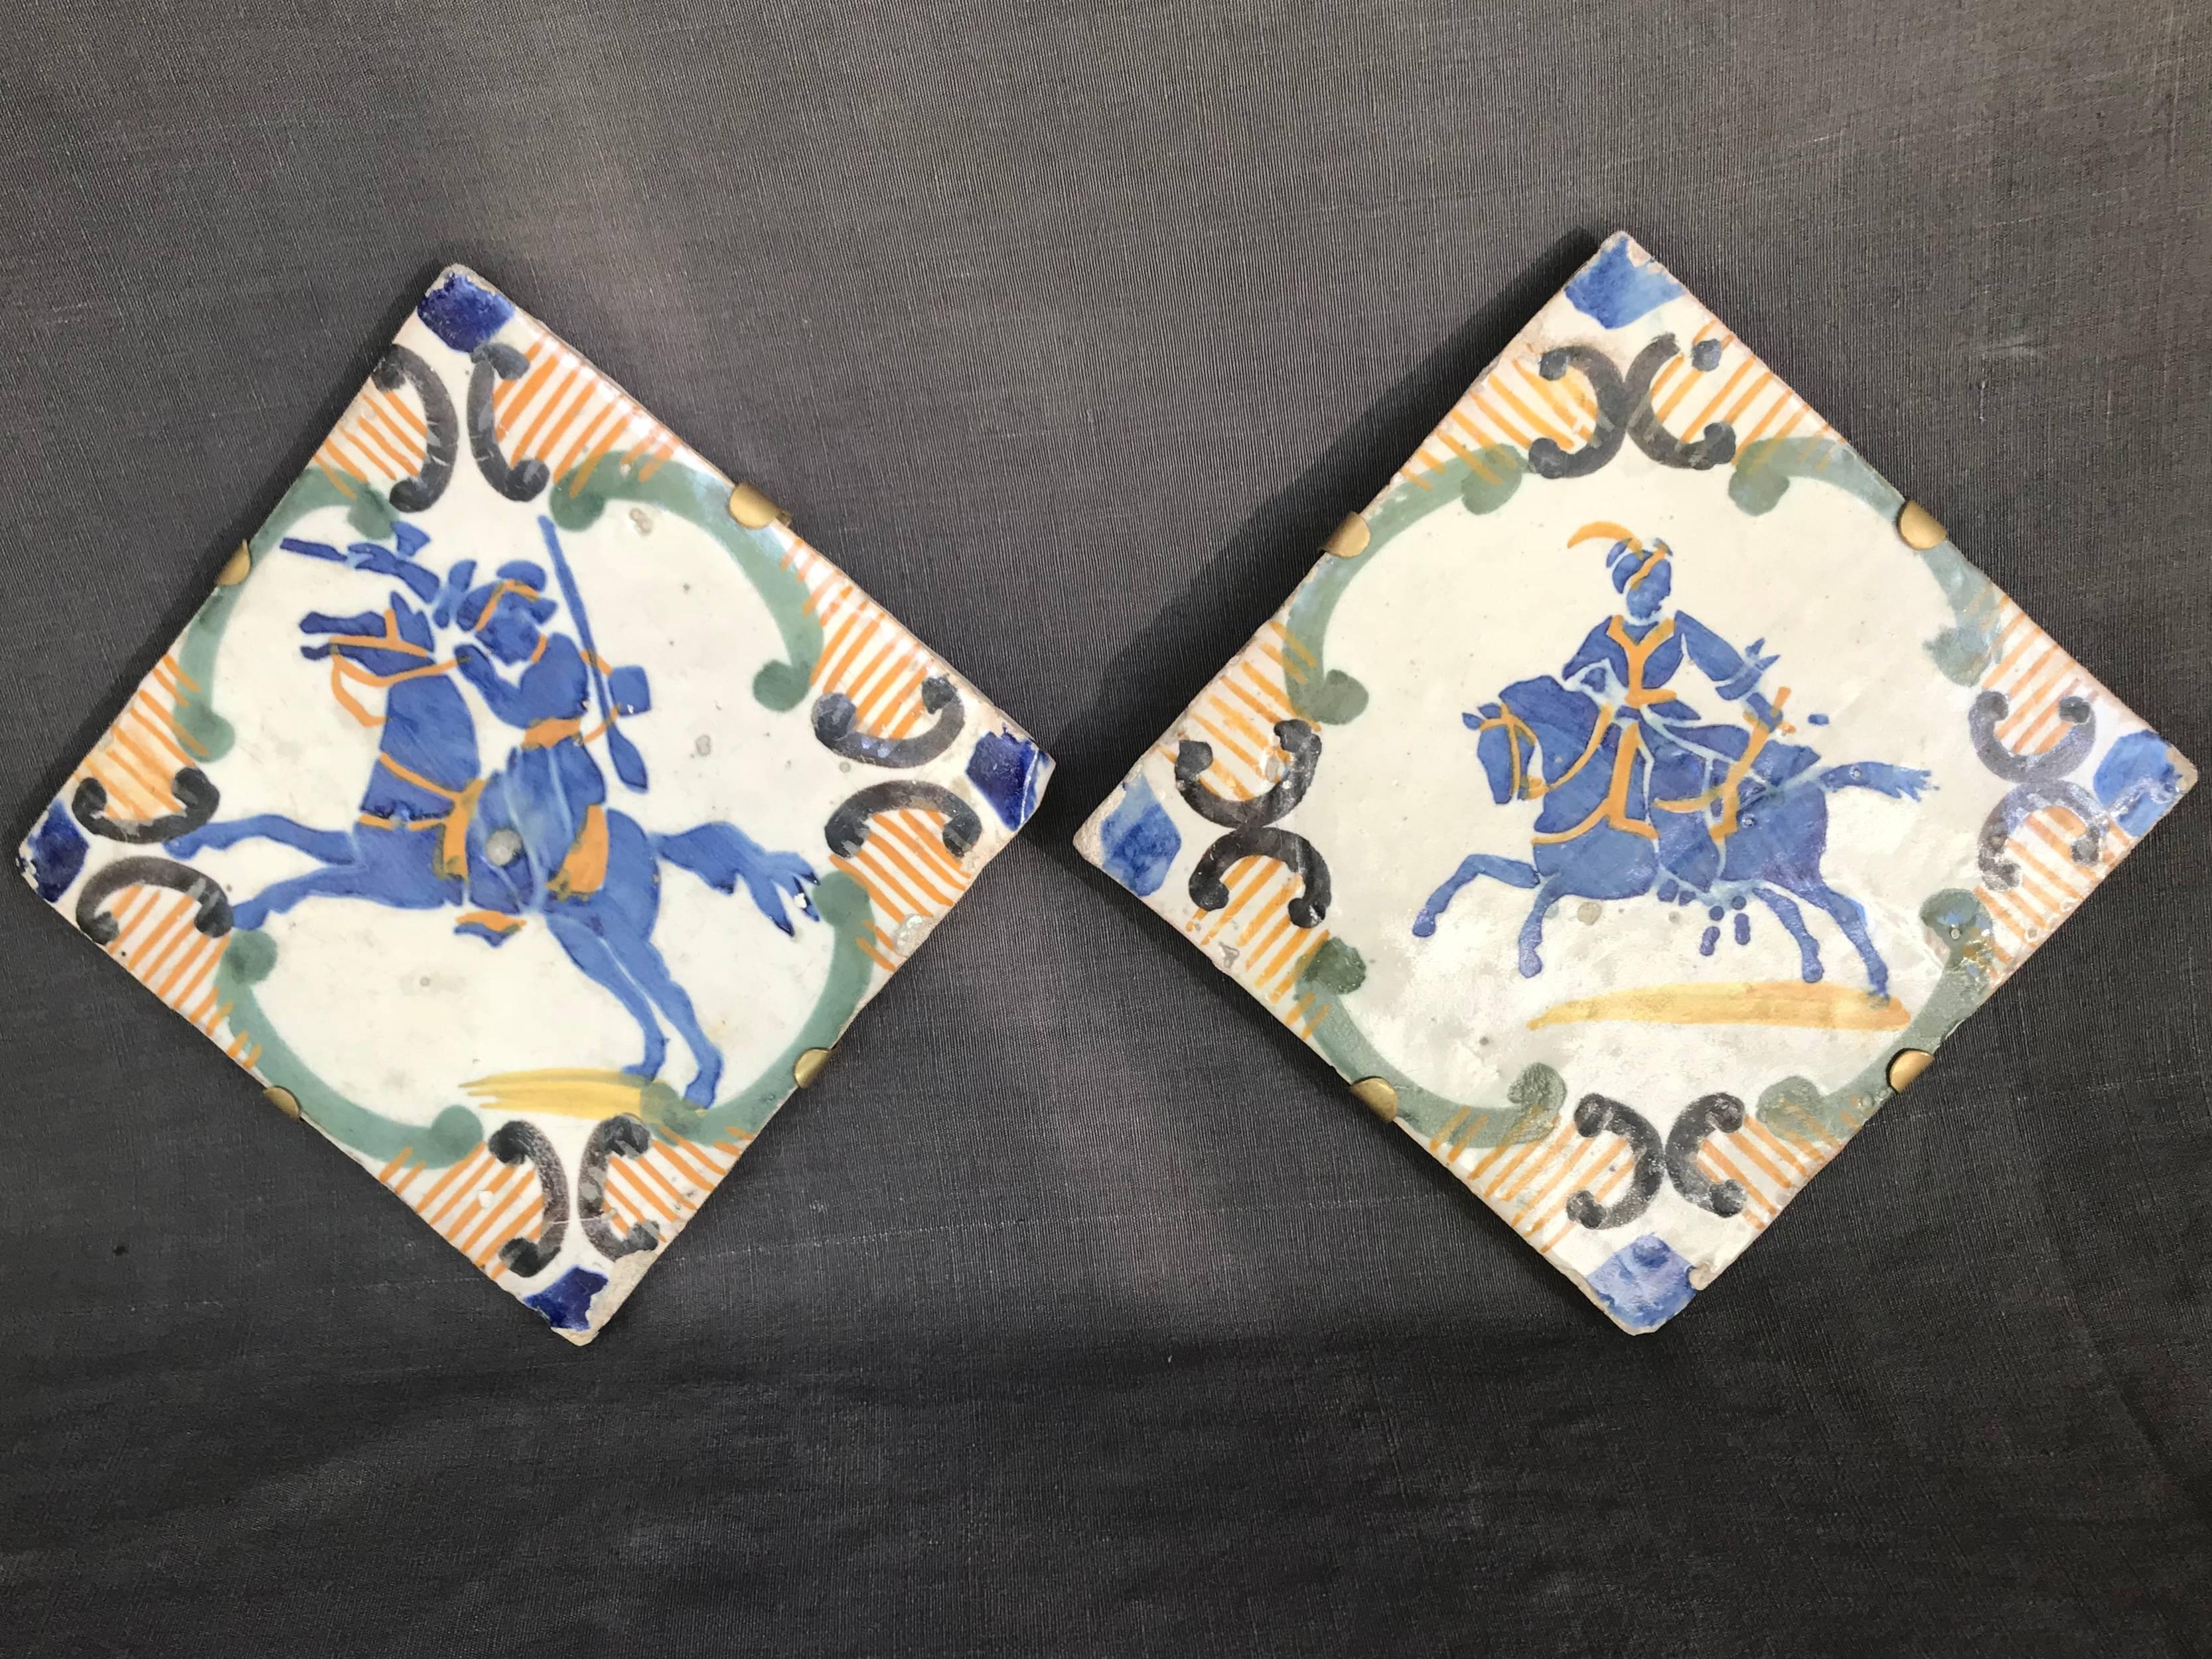 Pair of blue and yellow Neapolitan tiles. Pair of large equestrian-themed floor tiles of bold blue and yellow design featuring mounted huntsmen, of Italian and Arabic riders with hunting accoutrement; with custom brass hanging armature. Naples